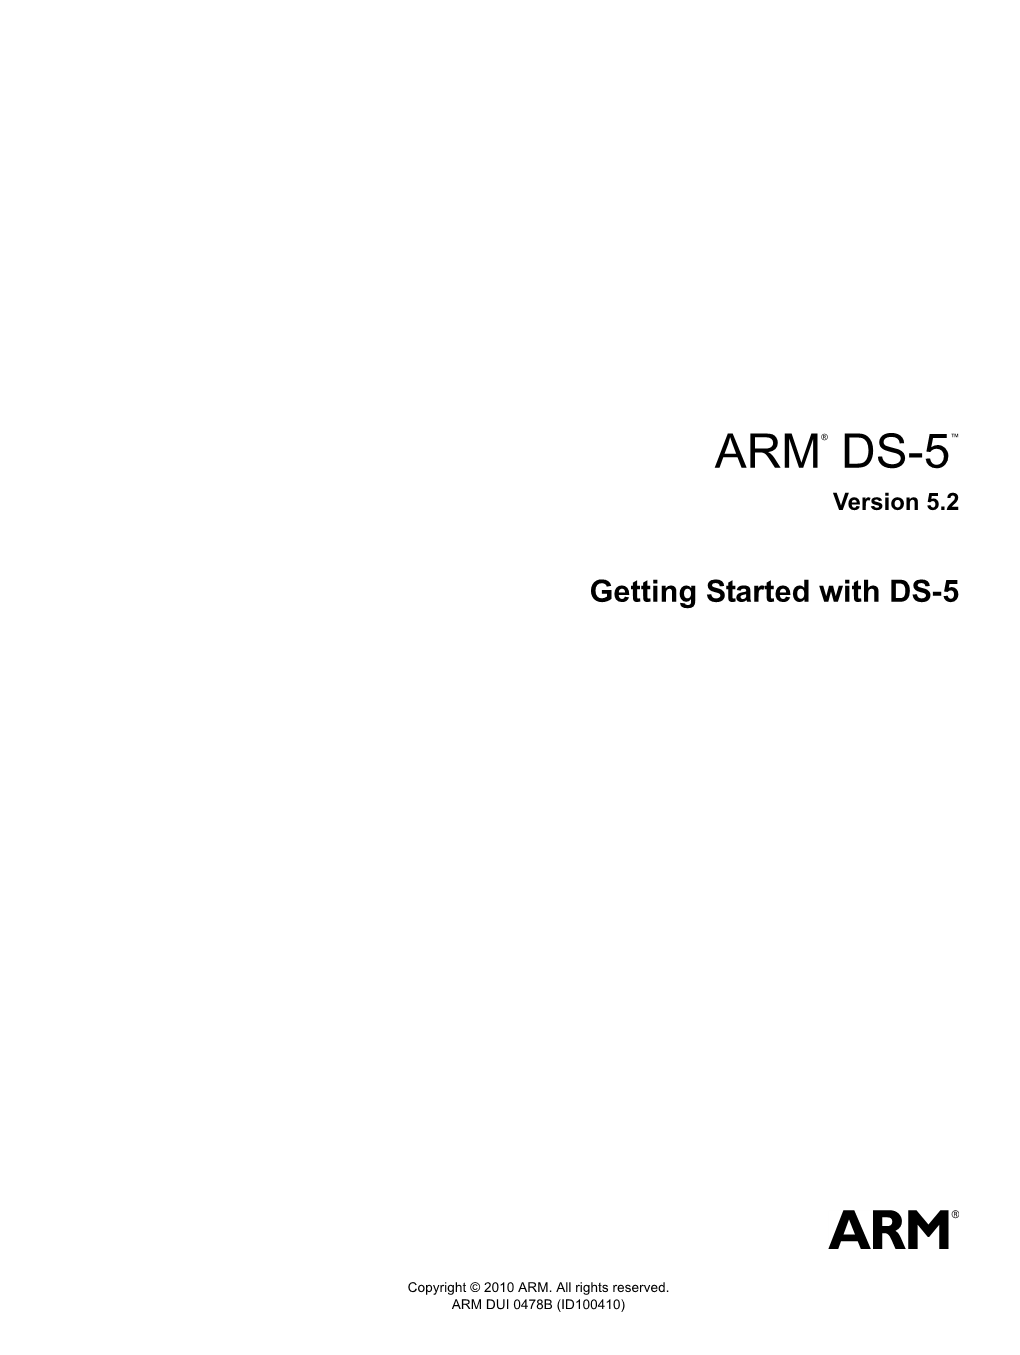 ARM DS-5 Getting Started with DS-5